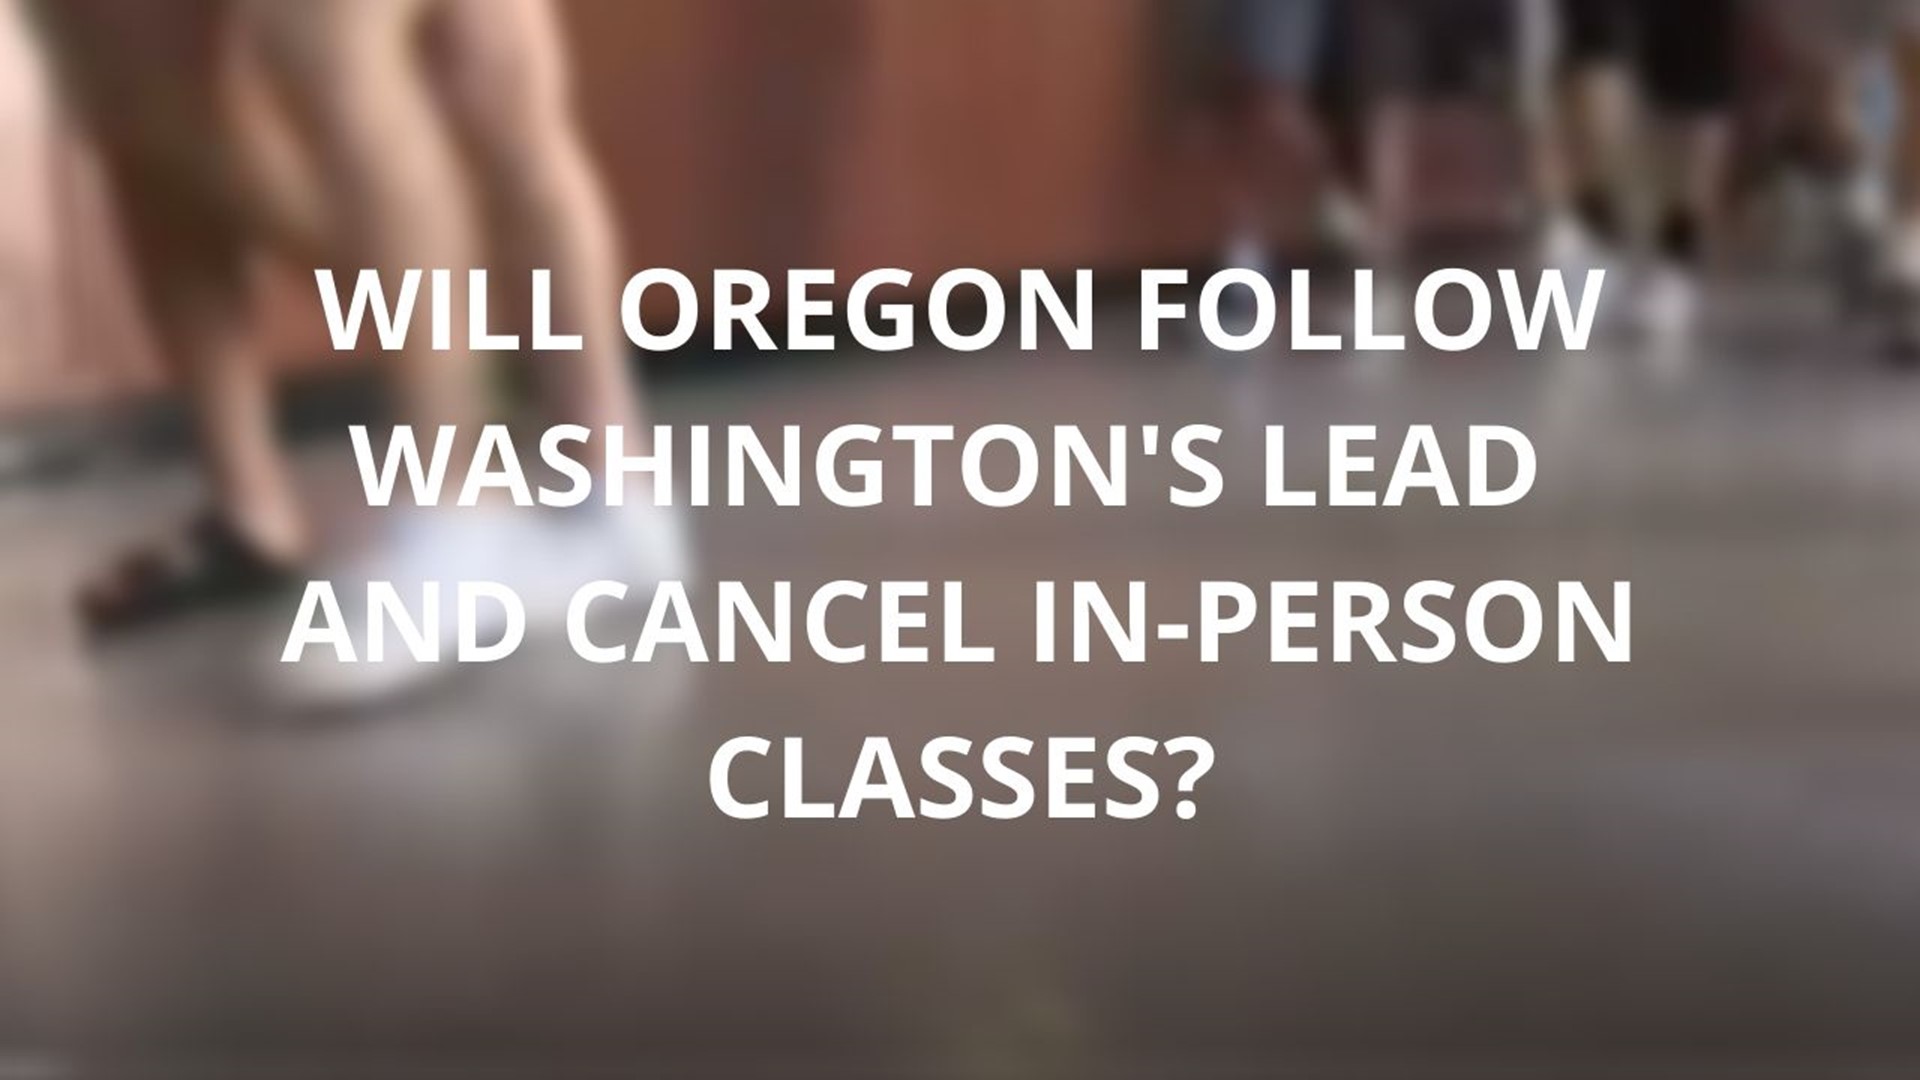 Oregon’s top education official, Colt Gill, has refused to talk publicly about Oregon’s plan.